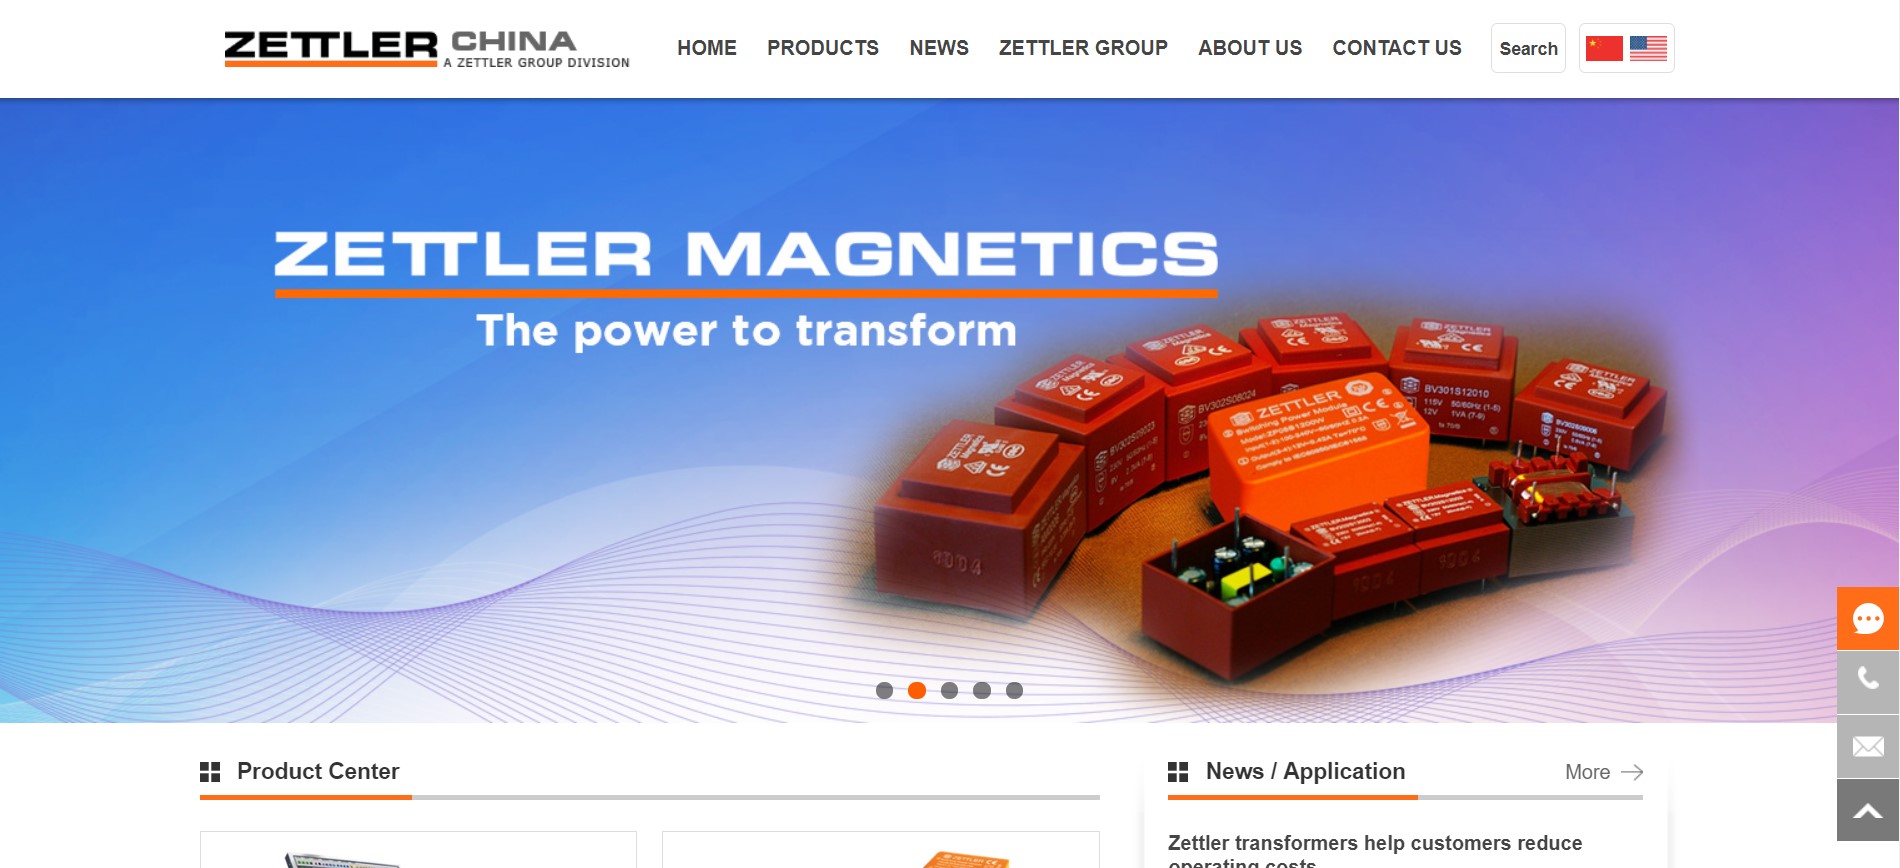 Zettler Group China launches upgraded version of its website